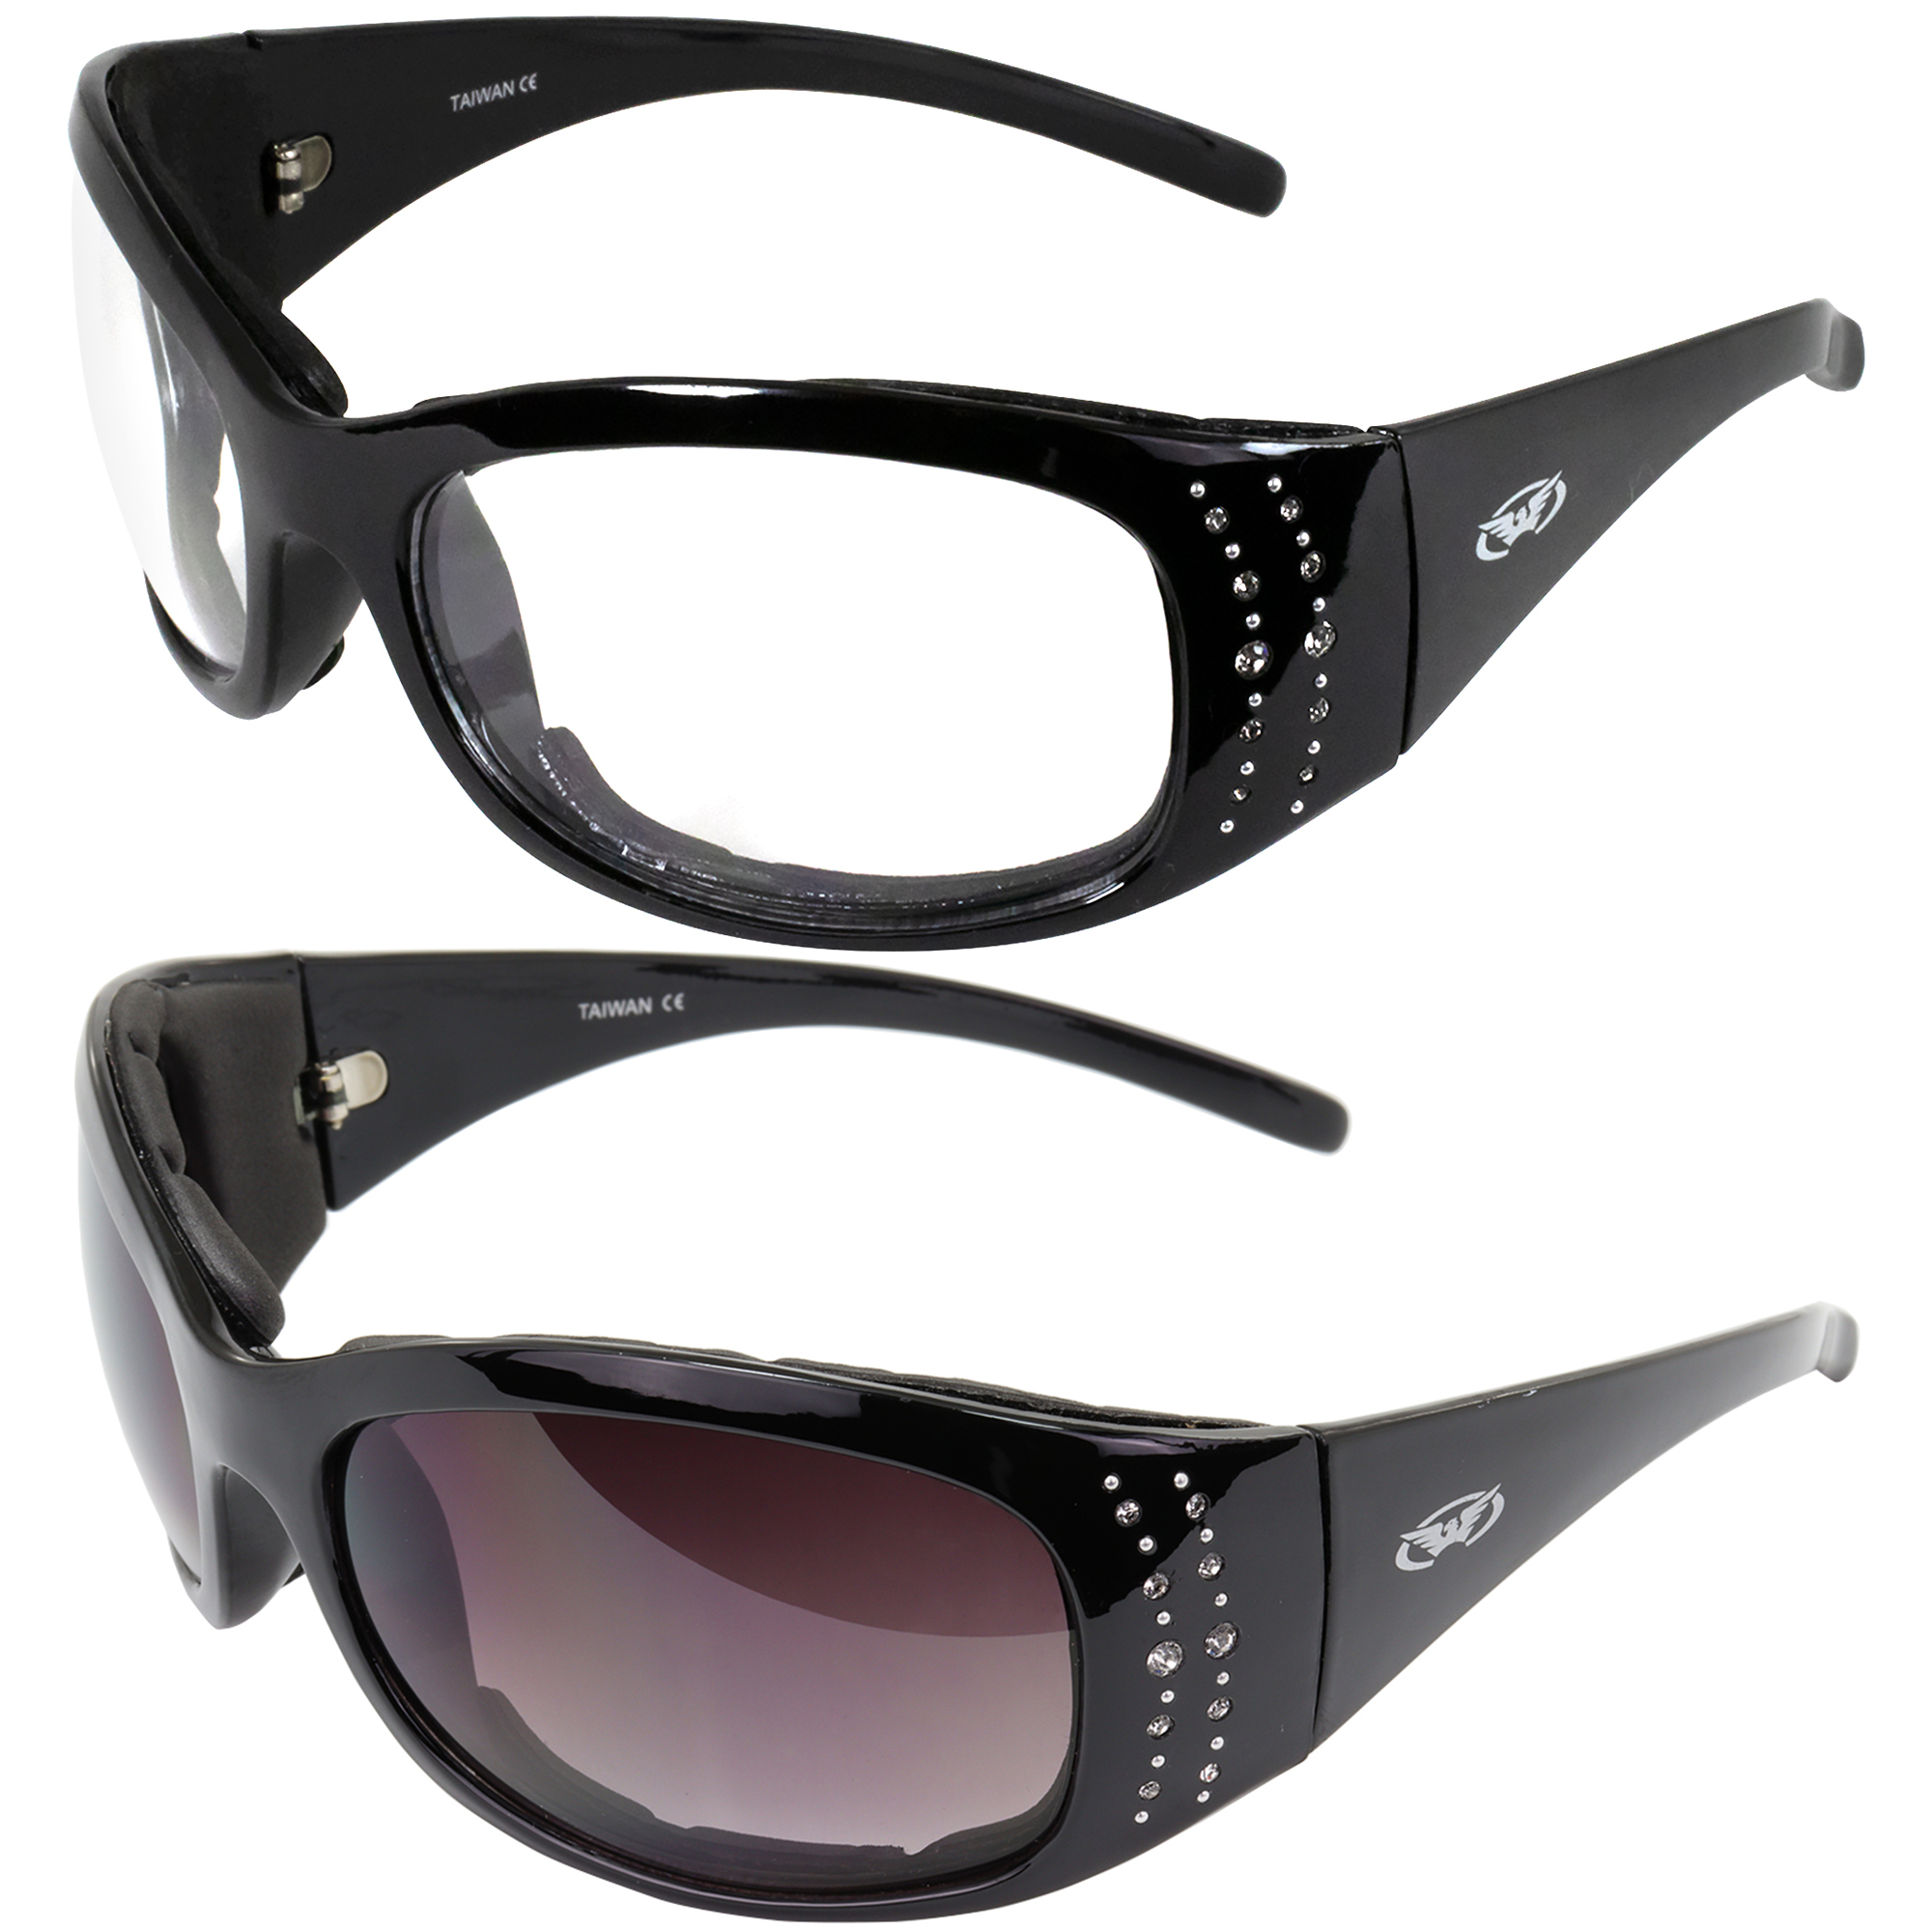 Global Vision Marilyn-2 Plus Motorcycle Riding Glasses for Women Sunglasses Black Padded Frames - image 1 of 7